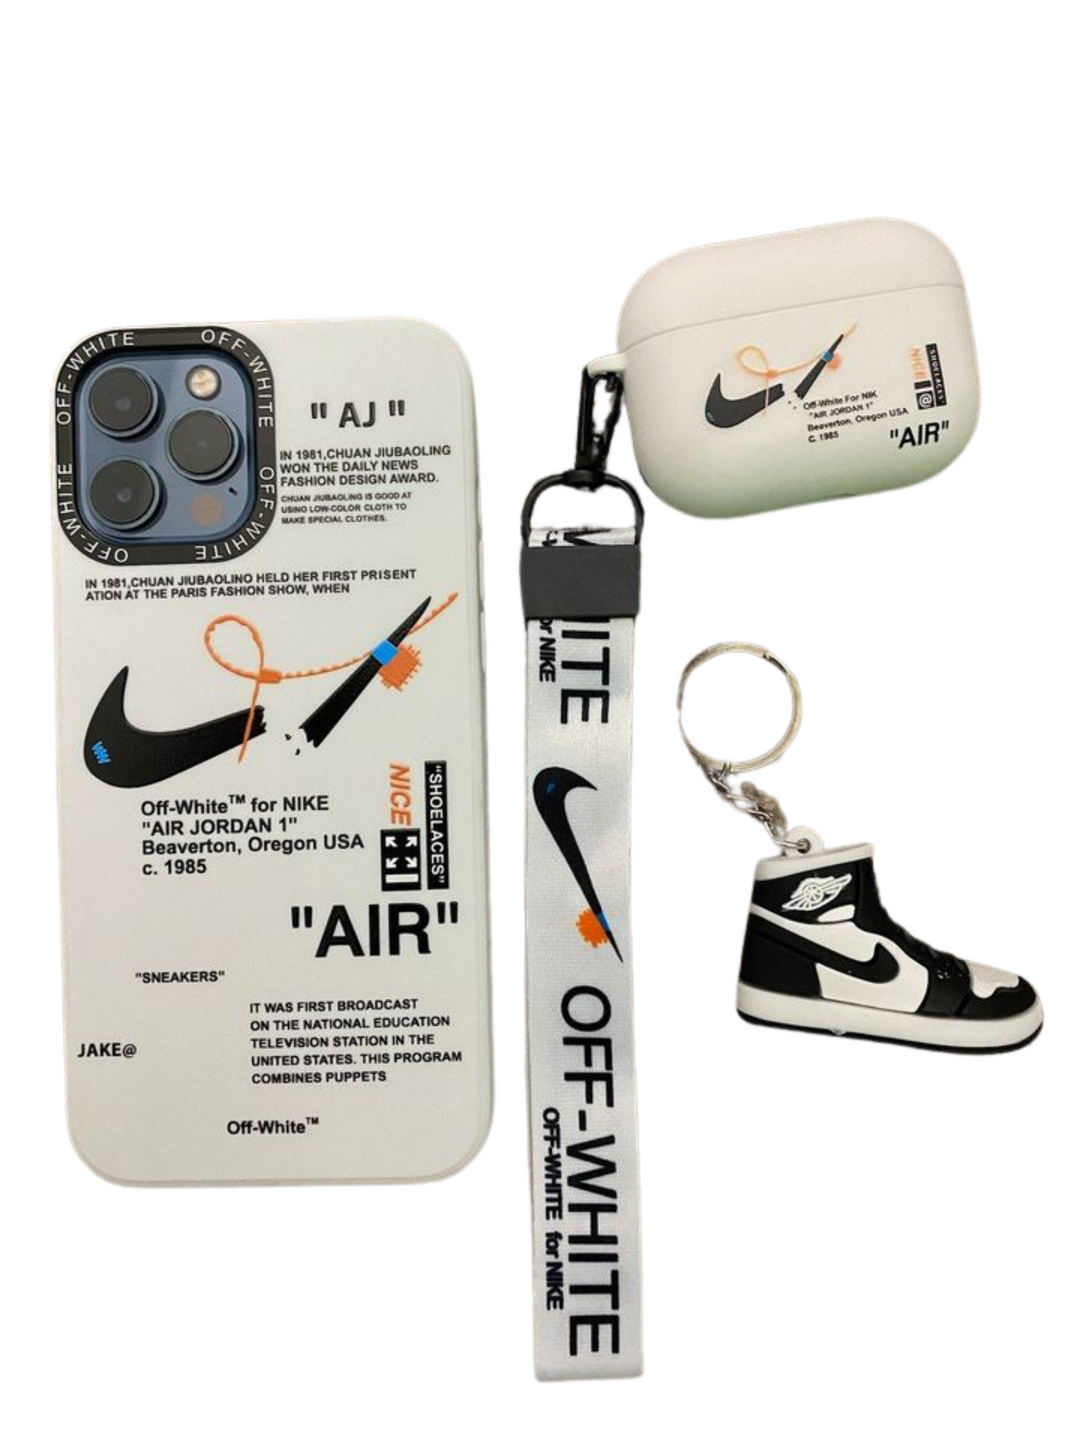 Exclusive Nike Off-White Streetwear Accessories Set - iPhone, AirPods, Keychain, Lanyard